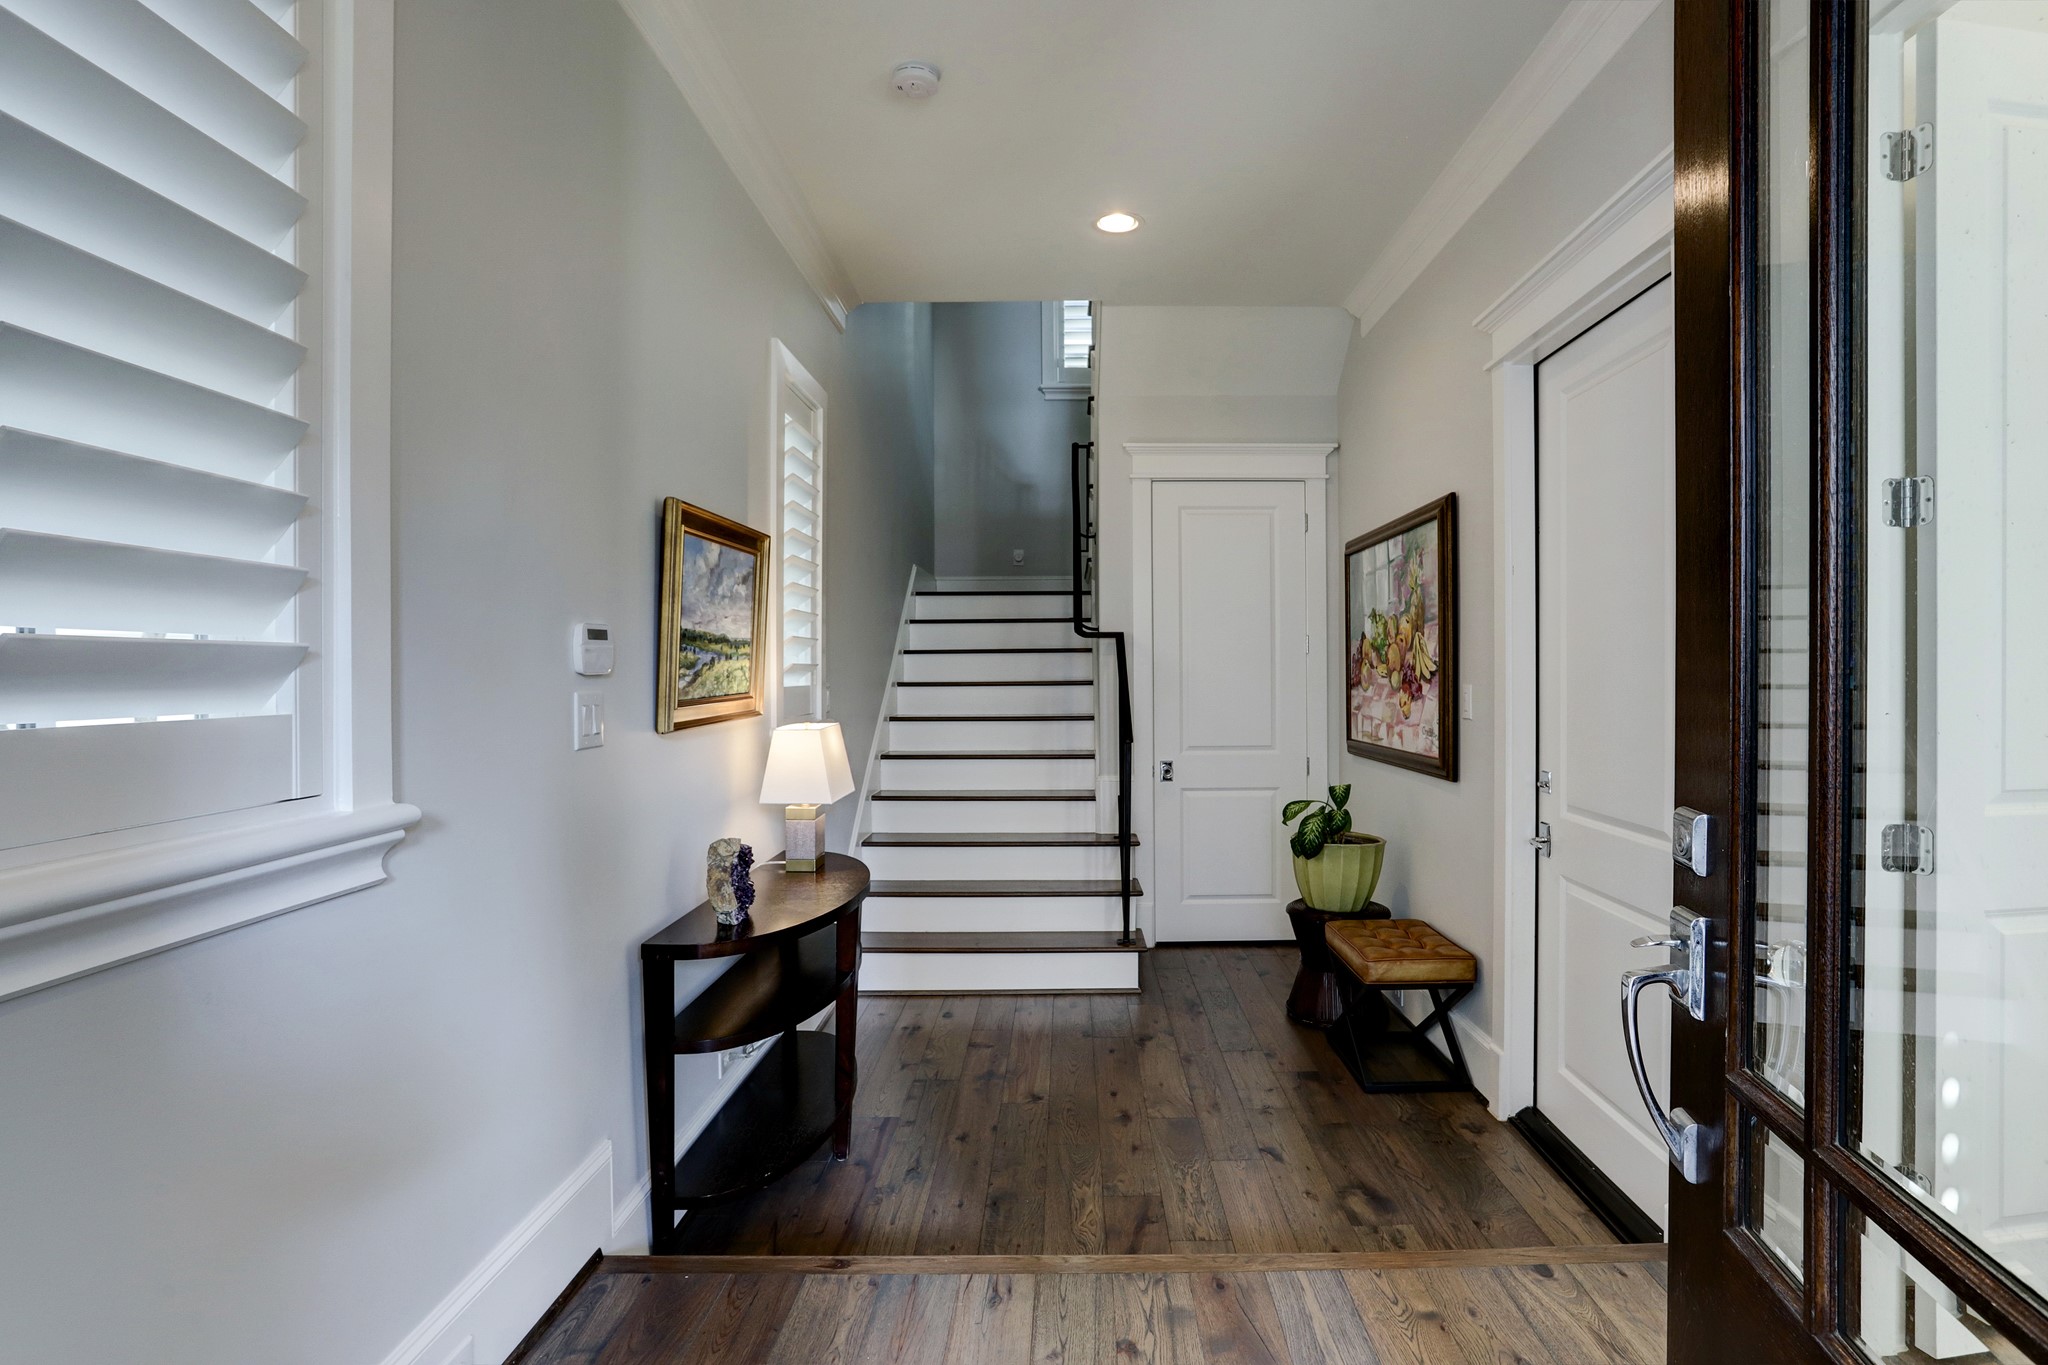 Welcoming entry with an oversized under the staircase closet and access to the garage as well as the first floor bedroom.